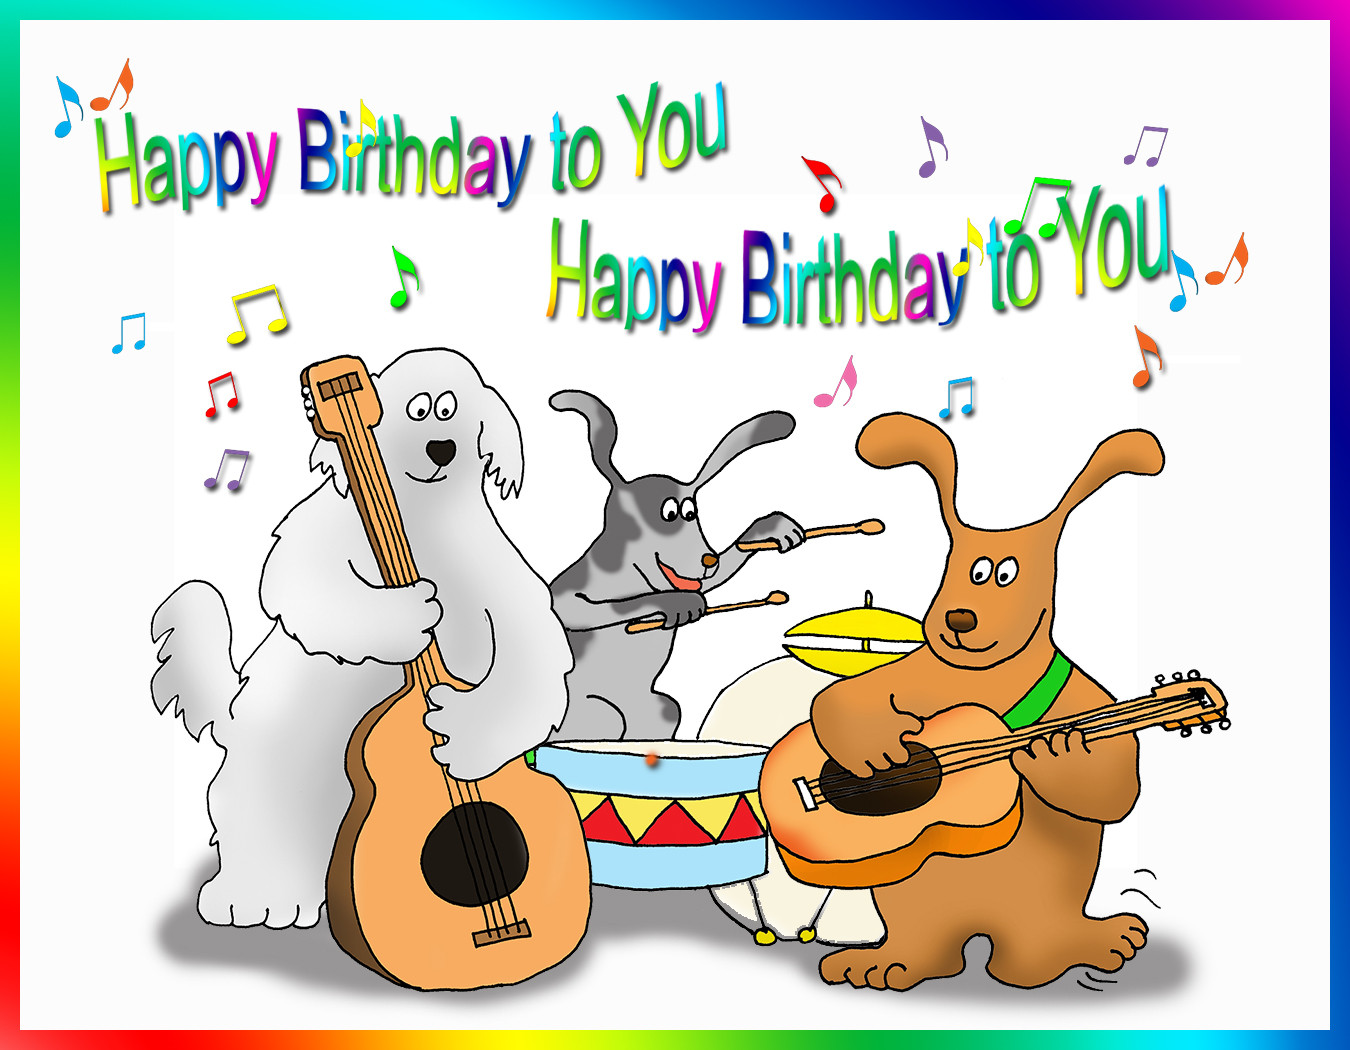 Free Animated Funny Birthday Cards
 Happy Birthday Card for You – Free Printable Greeting Cards